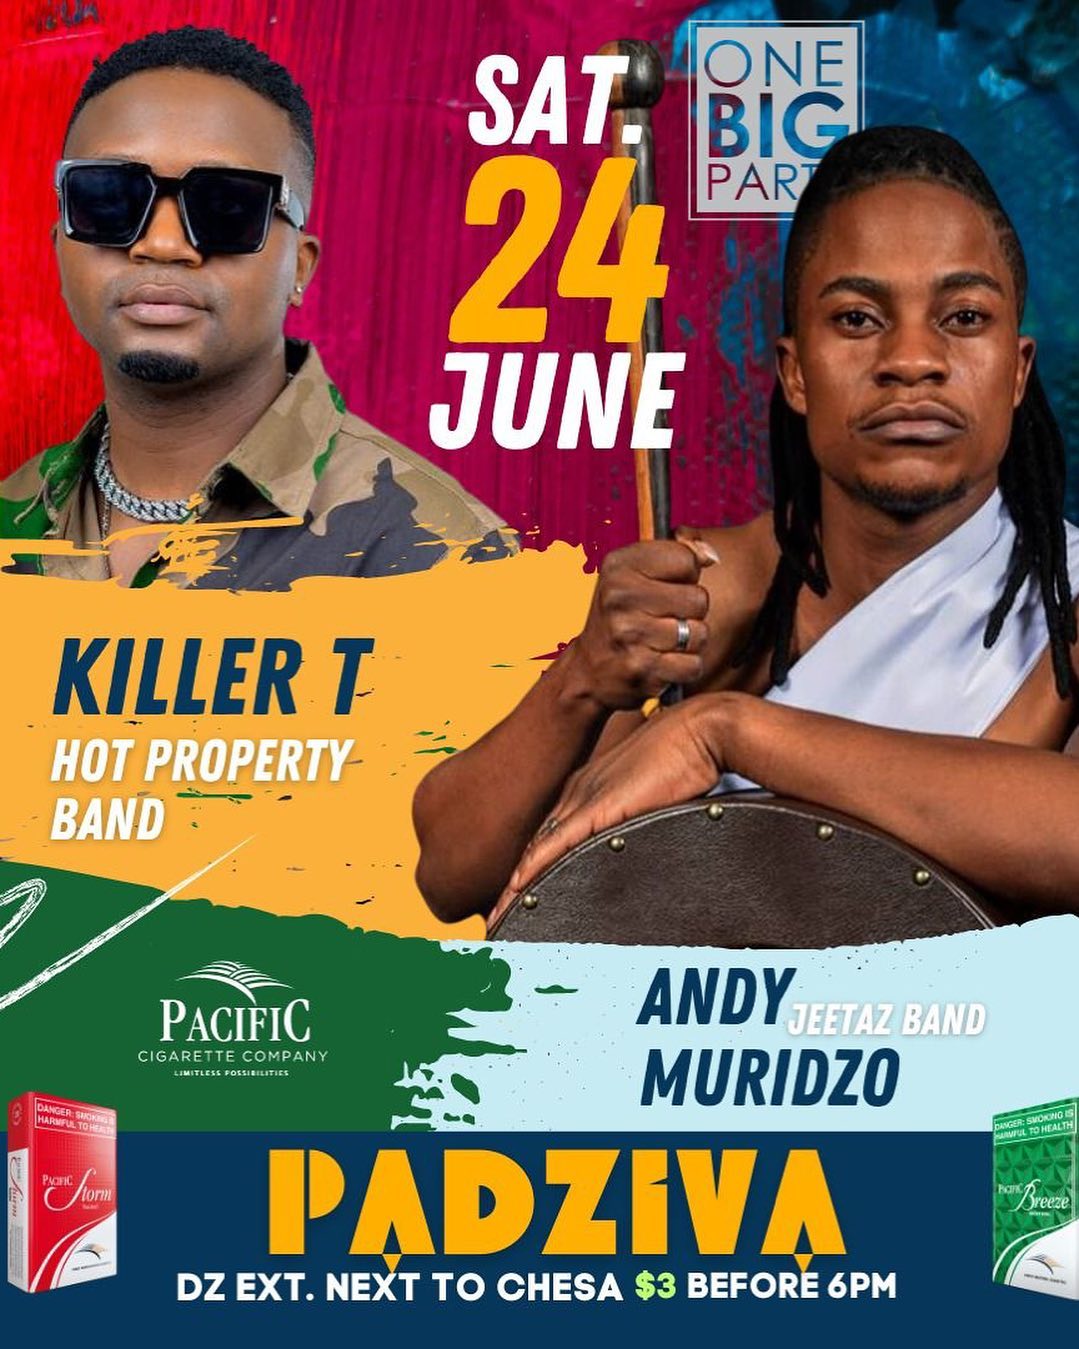 Events in Harare this weekend will include Killer T and Andy Muridzo bash, Cricket at Harare Sports Club and numerous other gigs.